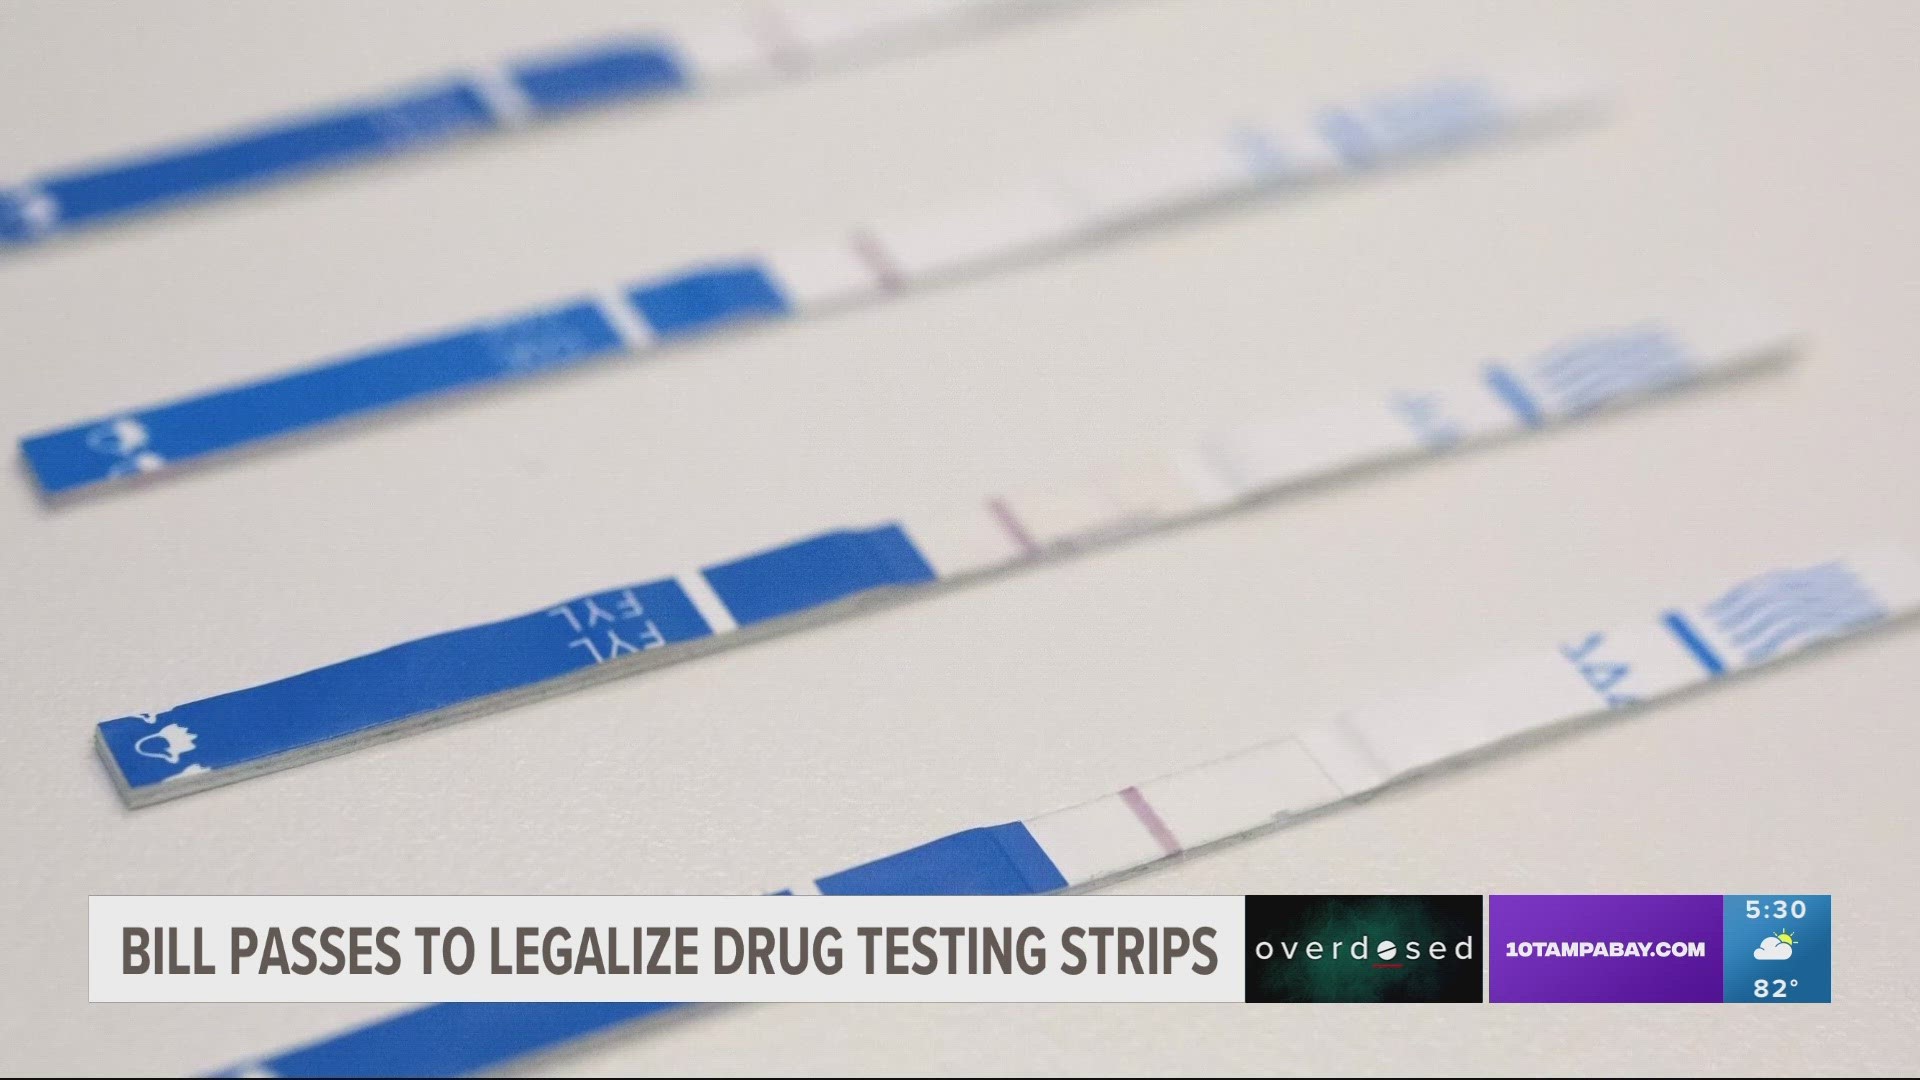 With fentanyl being laced into so many drugs, test strip kits could warn a user within minutes that the drug has fentanyl in it.